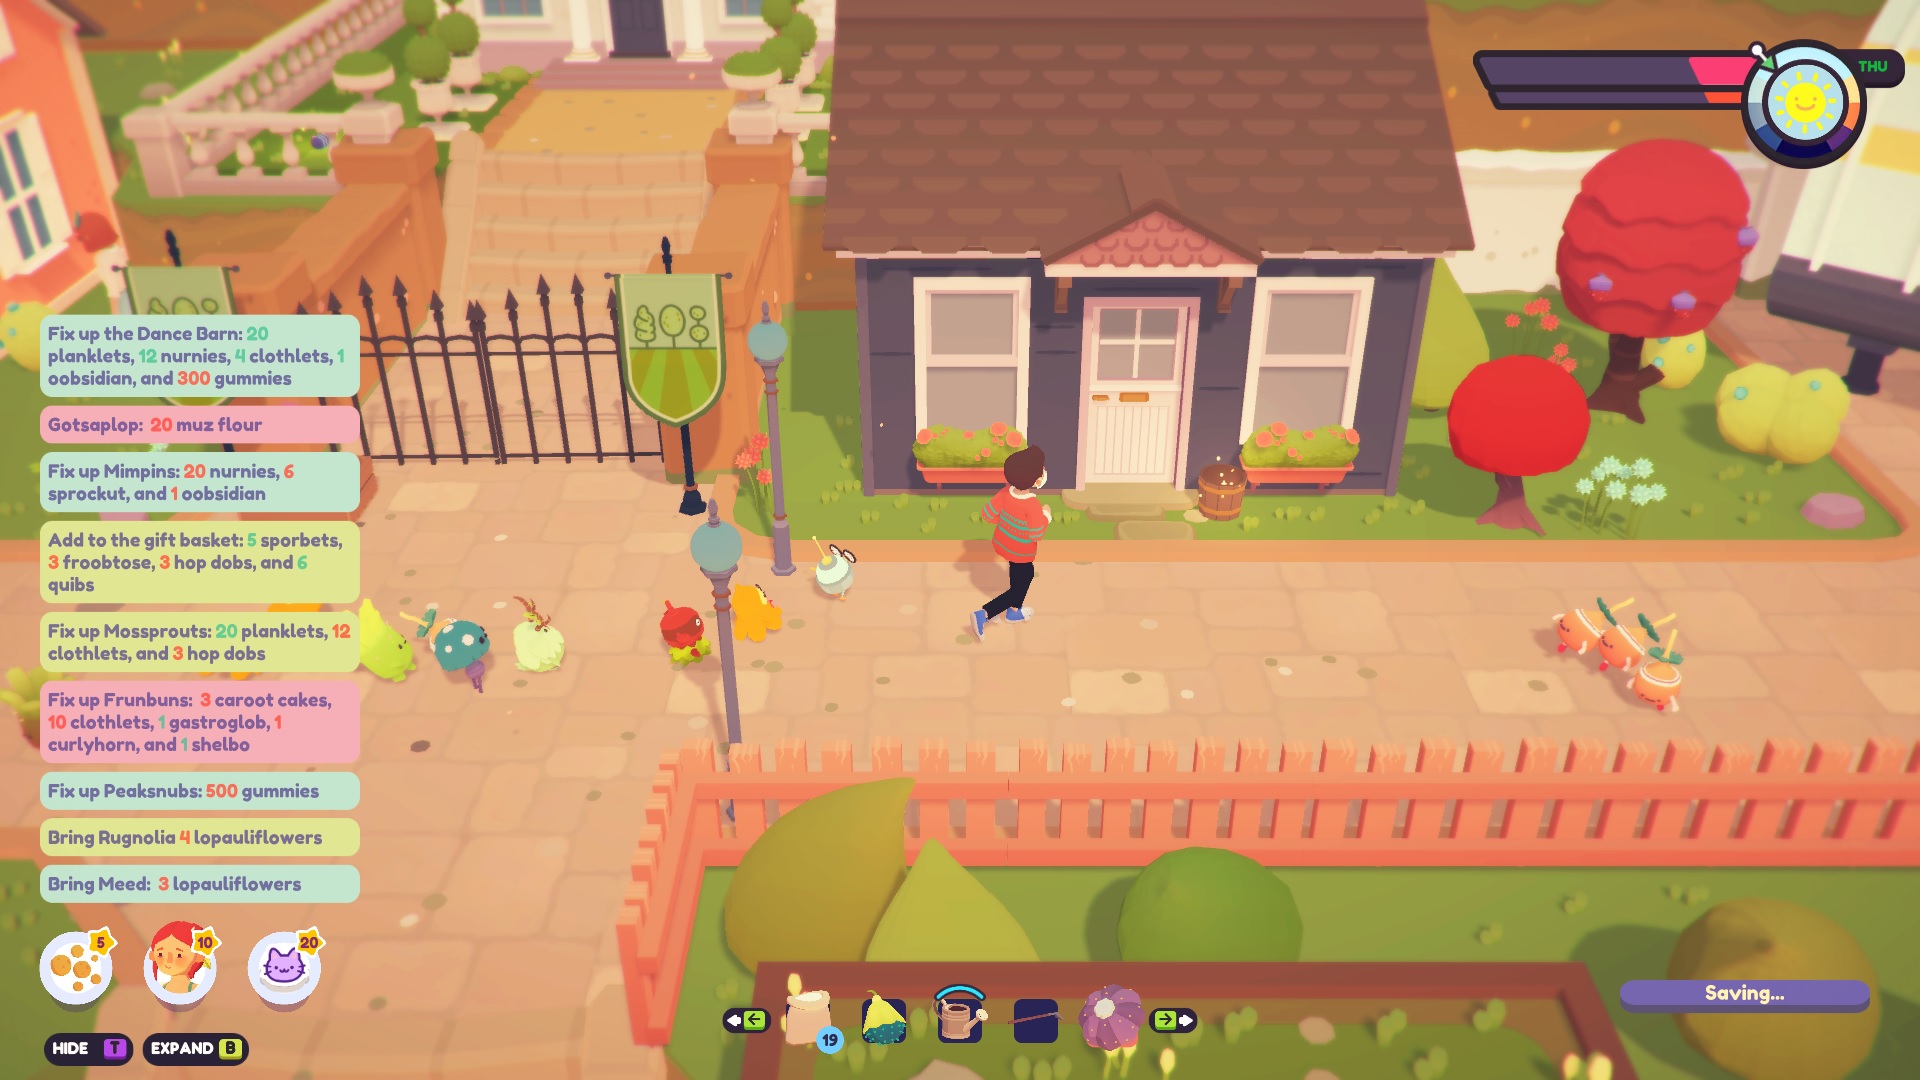 Something hidden in a sparkly barrel in Ooblets.